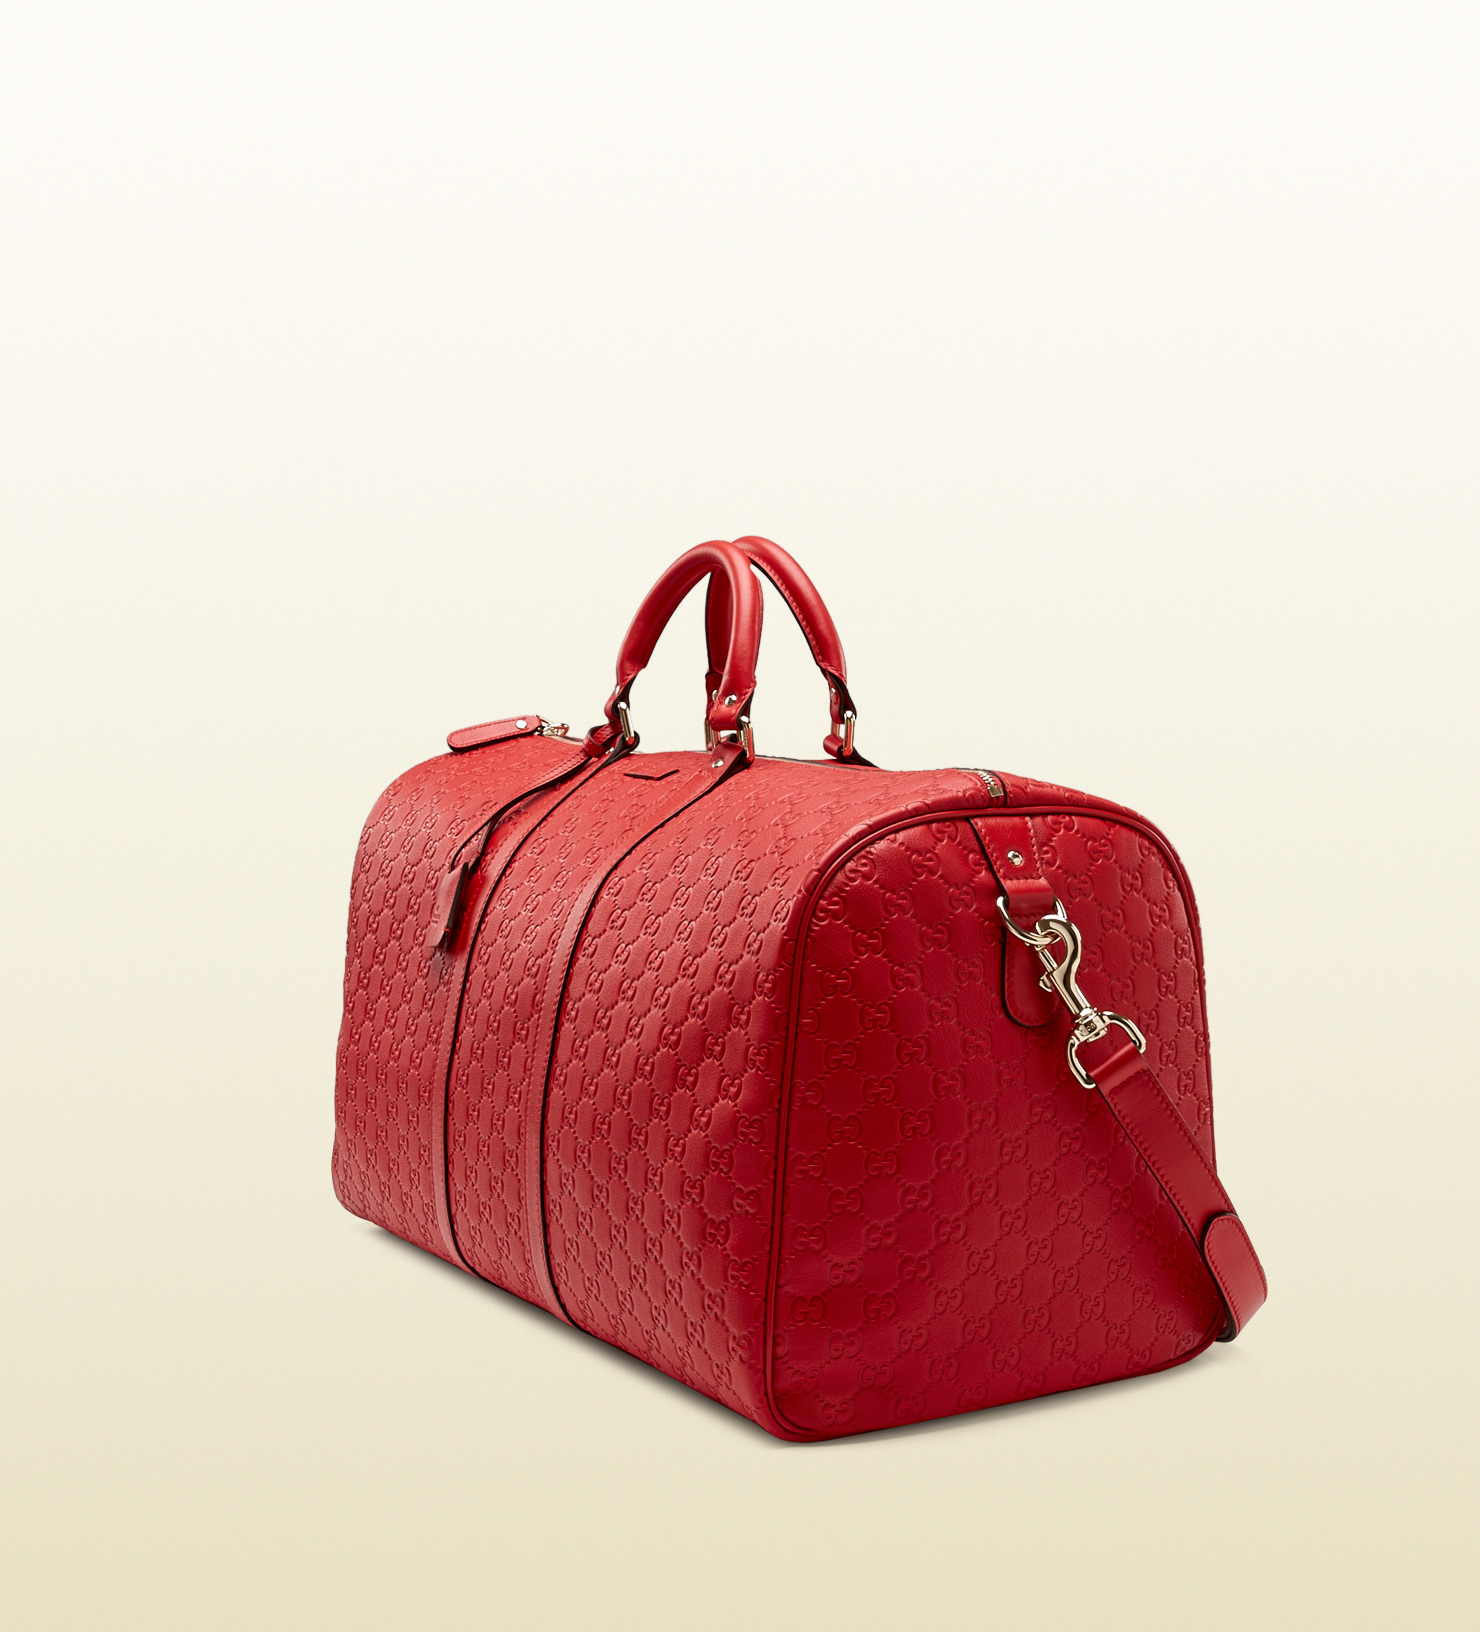 Lyst - Gucci Red Ssima Leather Carry-on Duffel Bag in Red